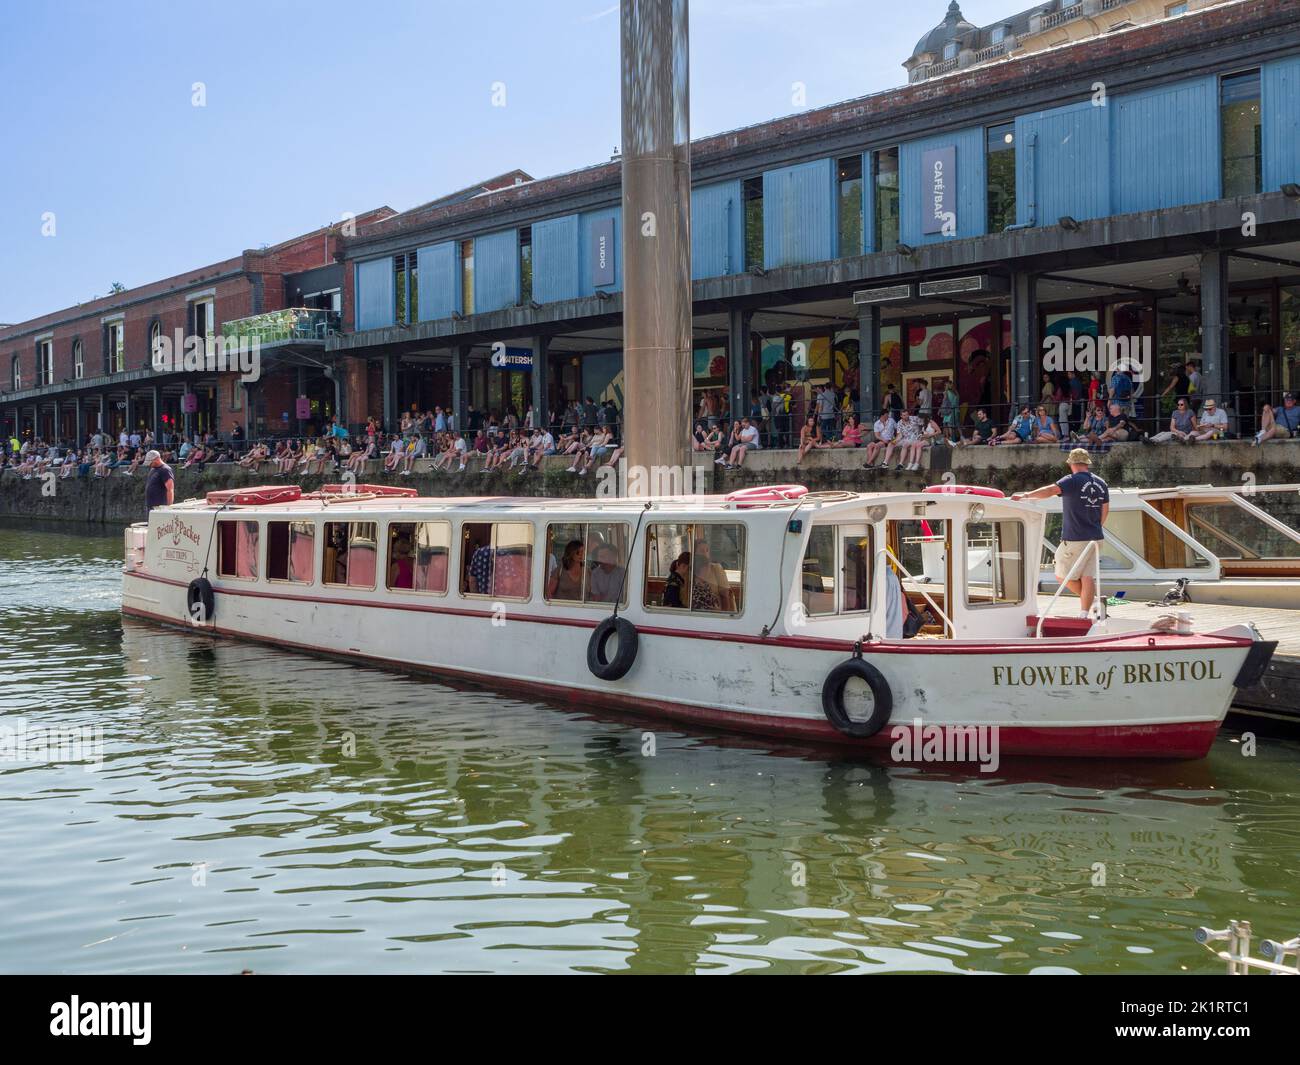 The Flower of Bristol pleasure boat belonging to Bristol Packet Boat Trips company in St Augustine’s Reach in the Bristol Harbour during the Bristol Harbour Festival in 2022, England, UK. Stock Photo